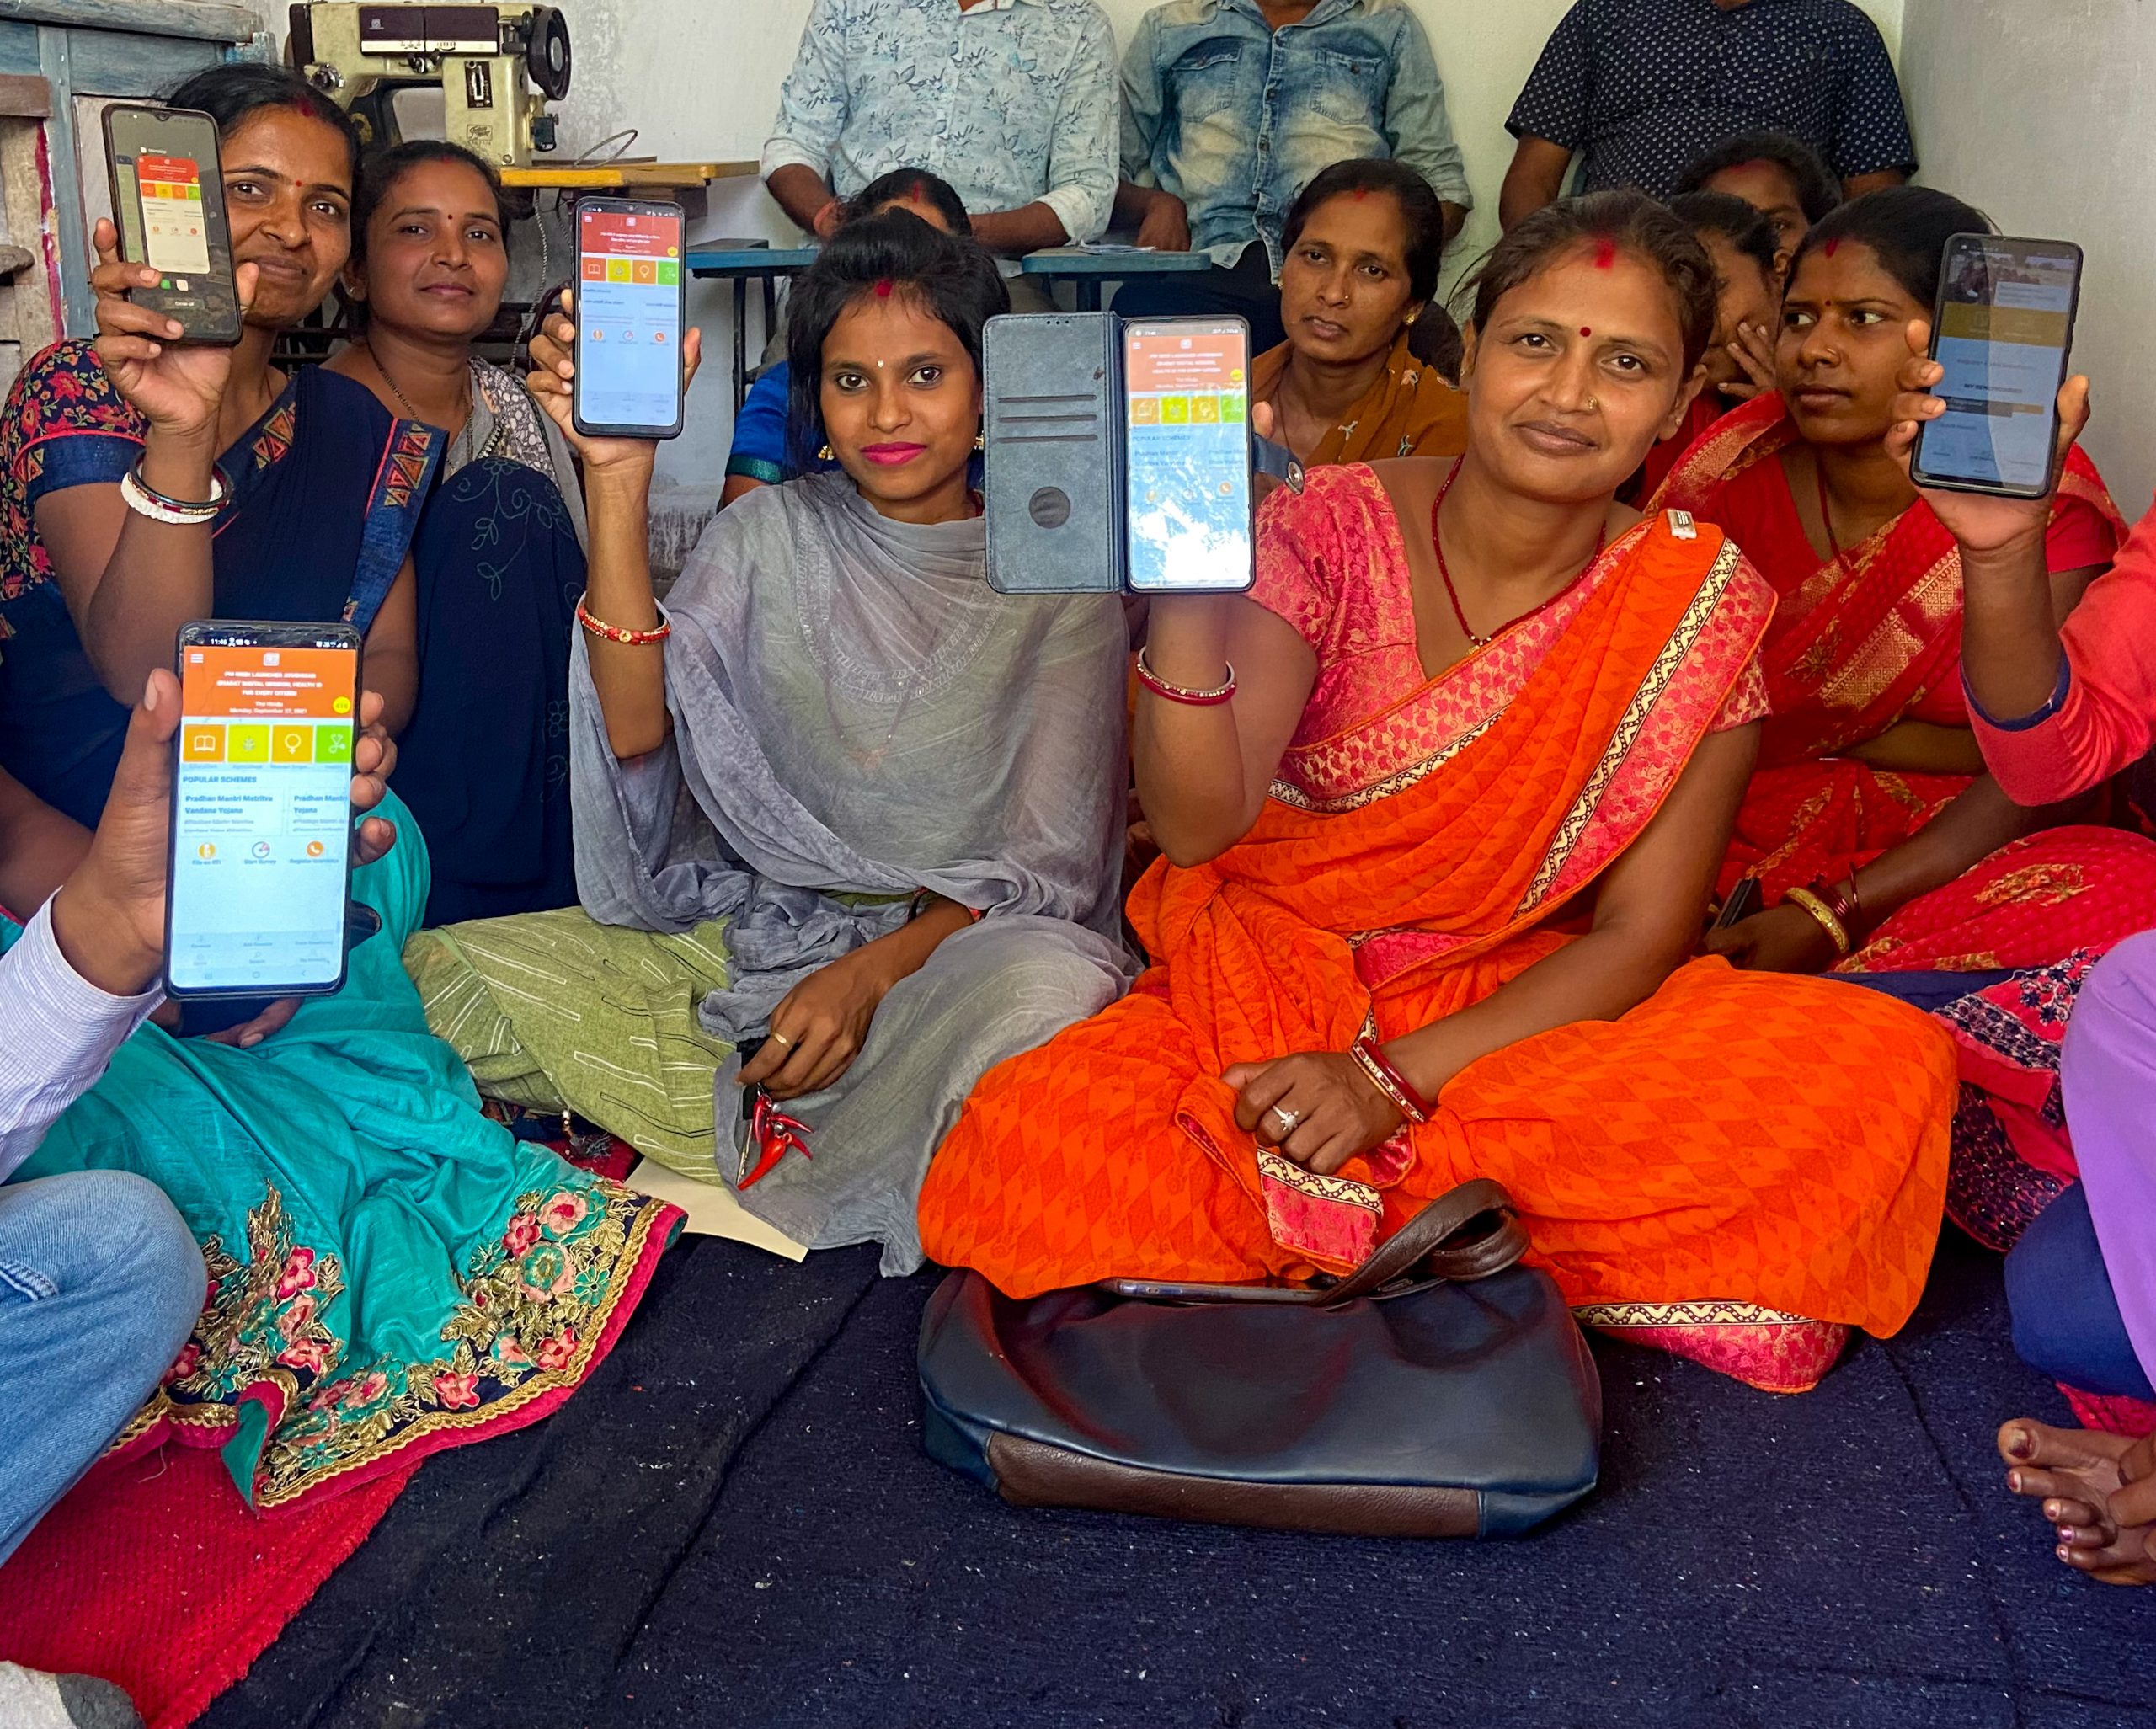 A group of women sitting in a room showing the MeraApp on their smartphones